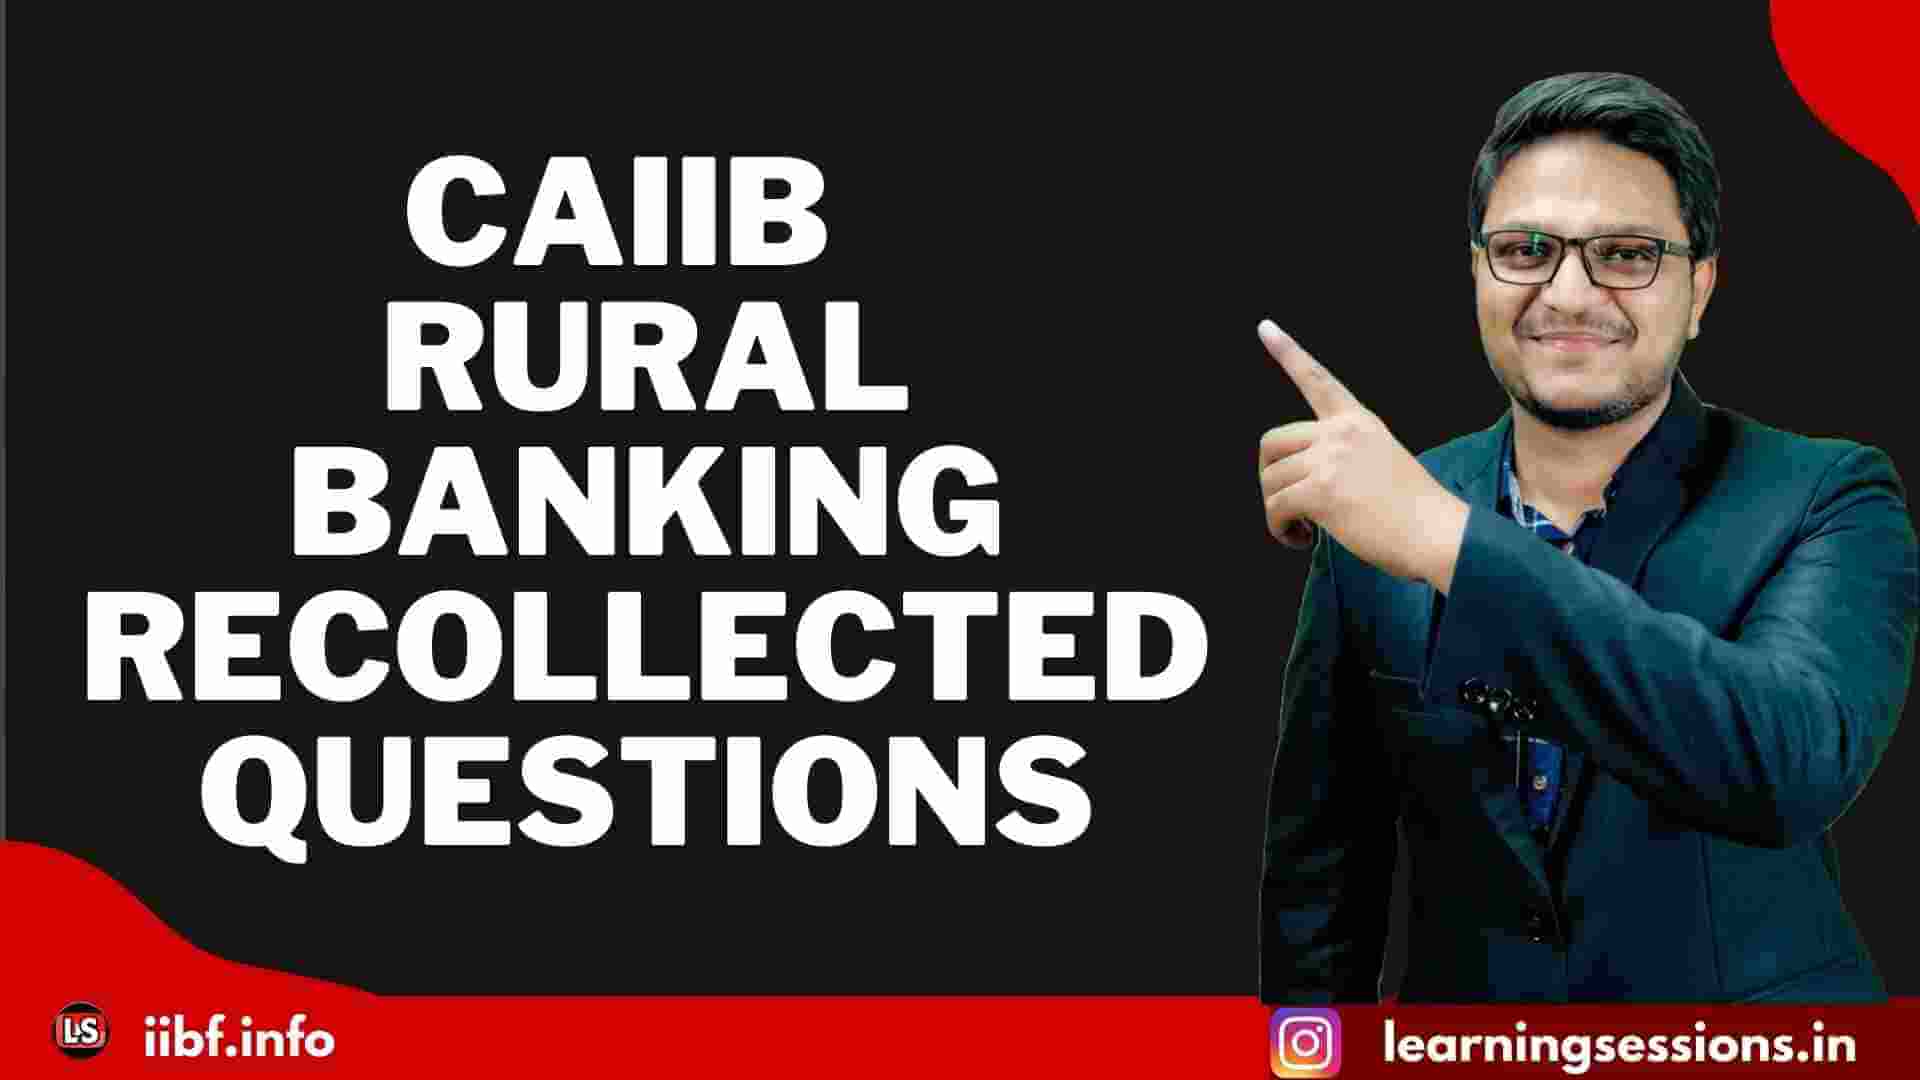 IIBF CAIIB RURAL BANKING RECOLLECTED QUESTIONS 2021-2022